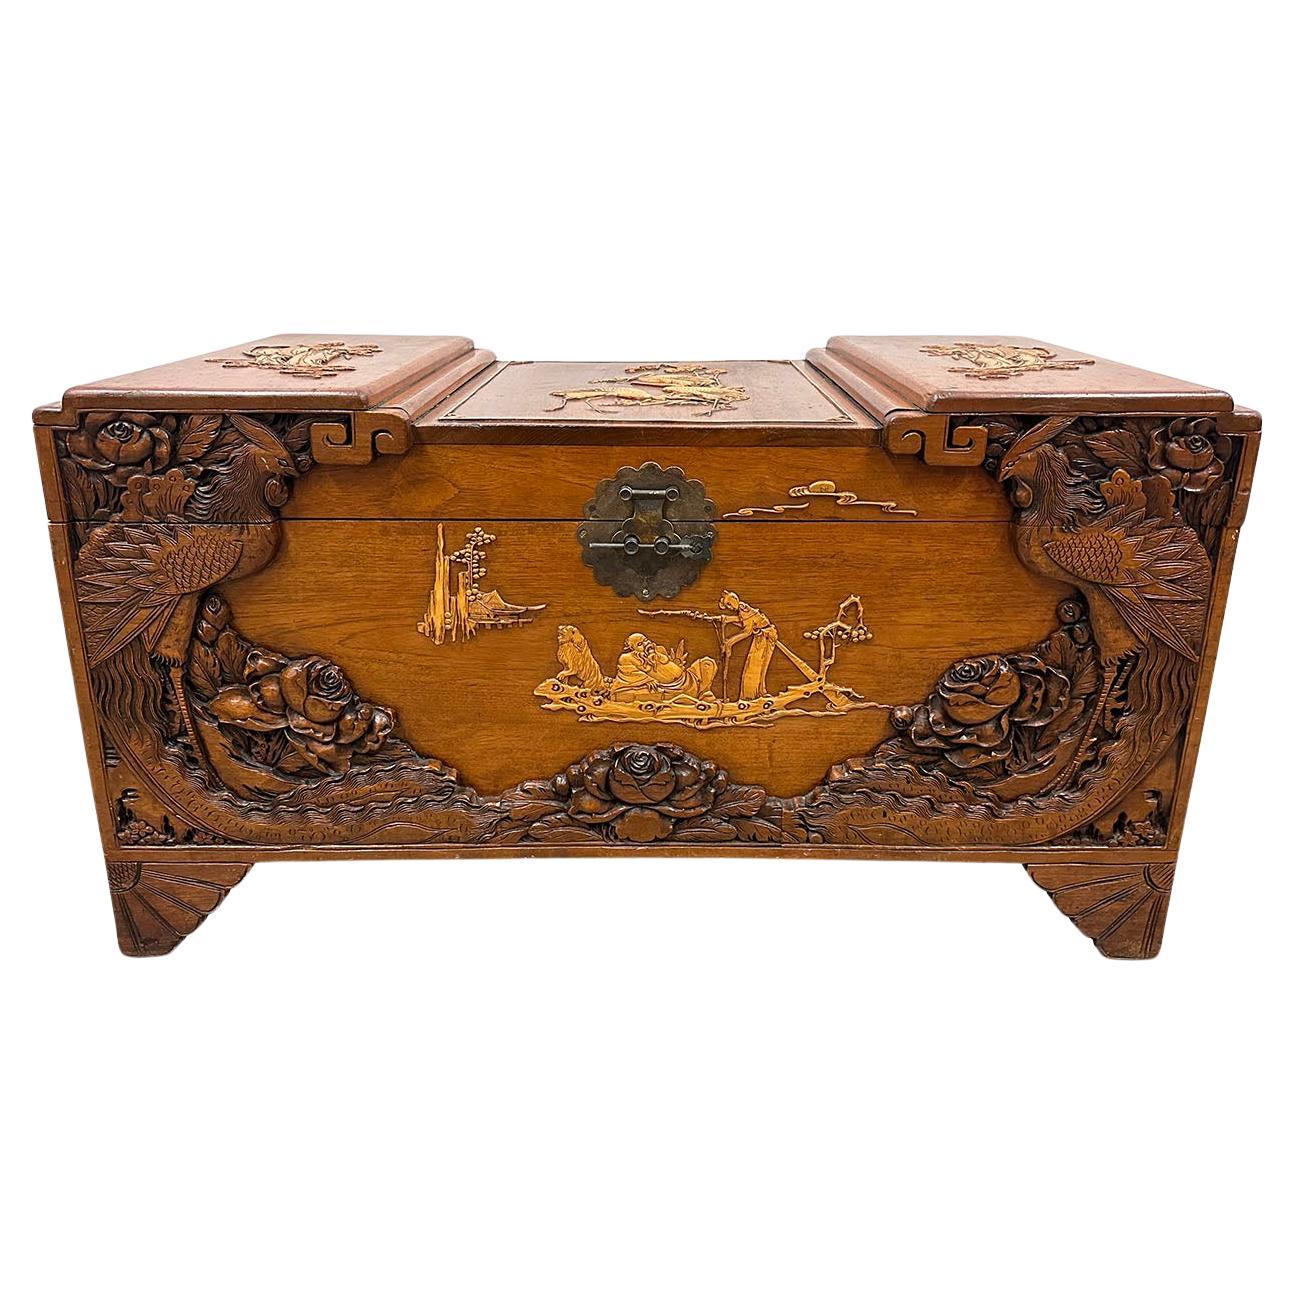 How much is an old cedar chest worth?